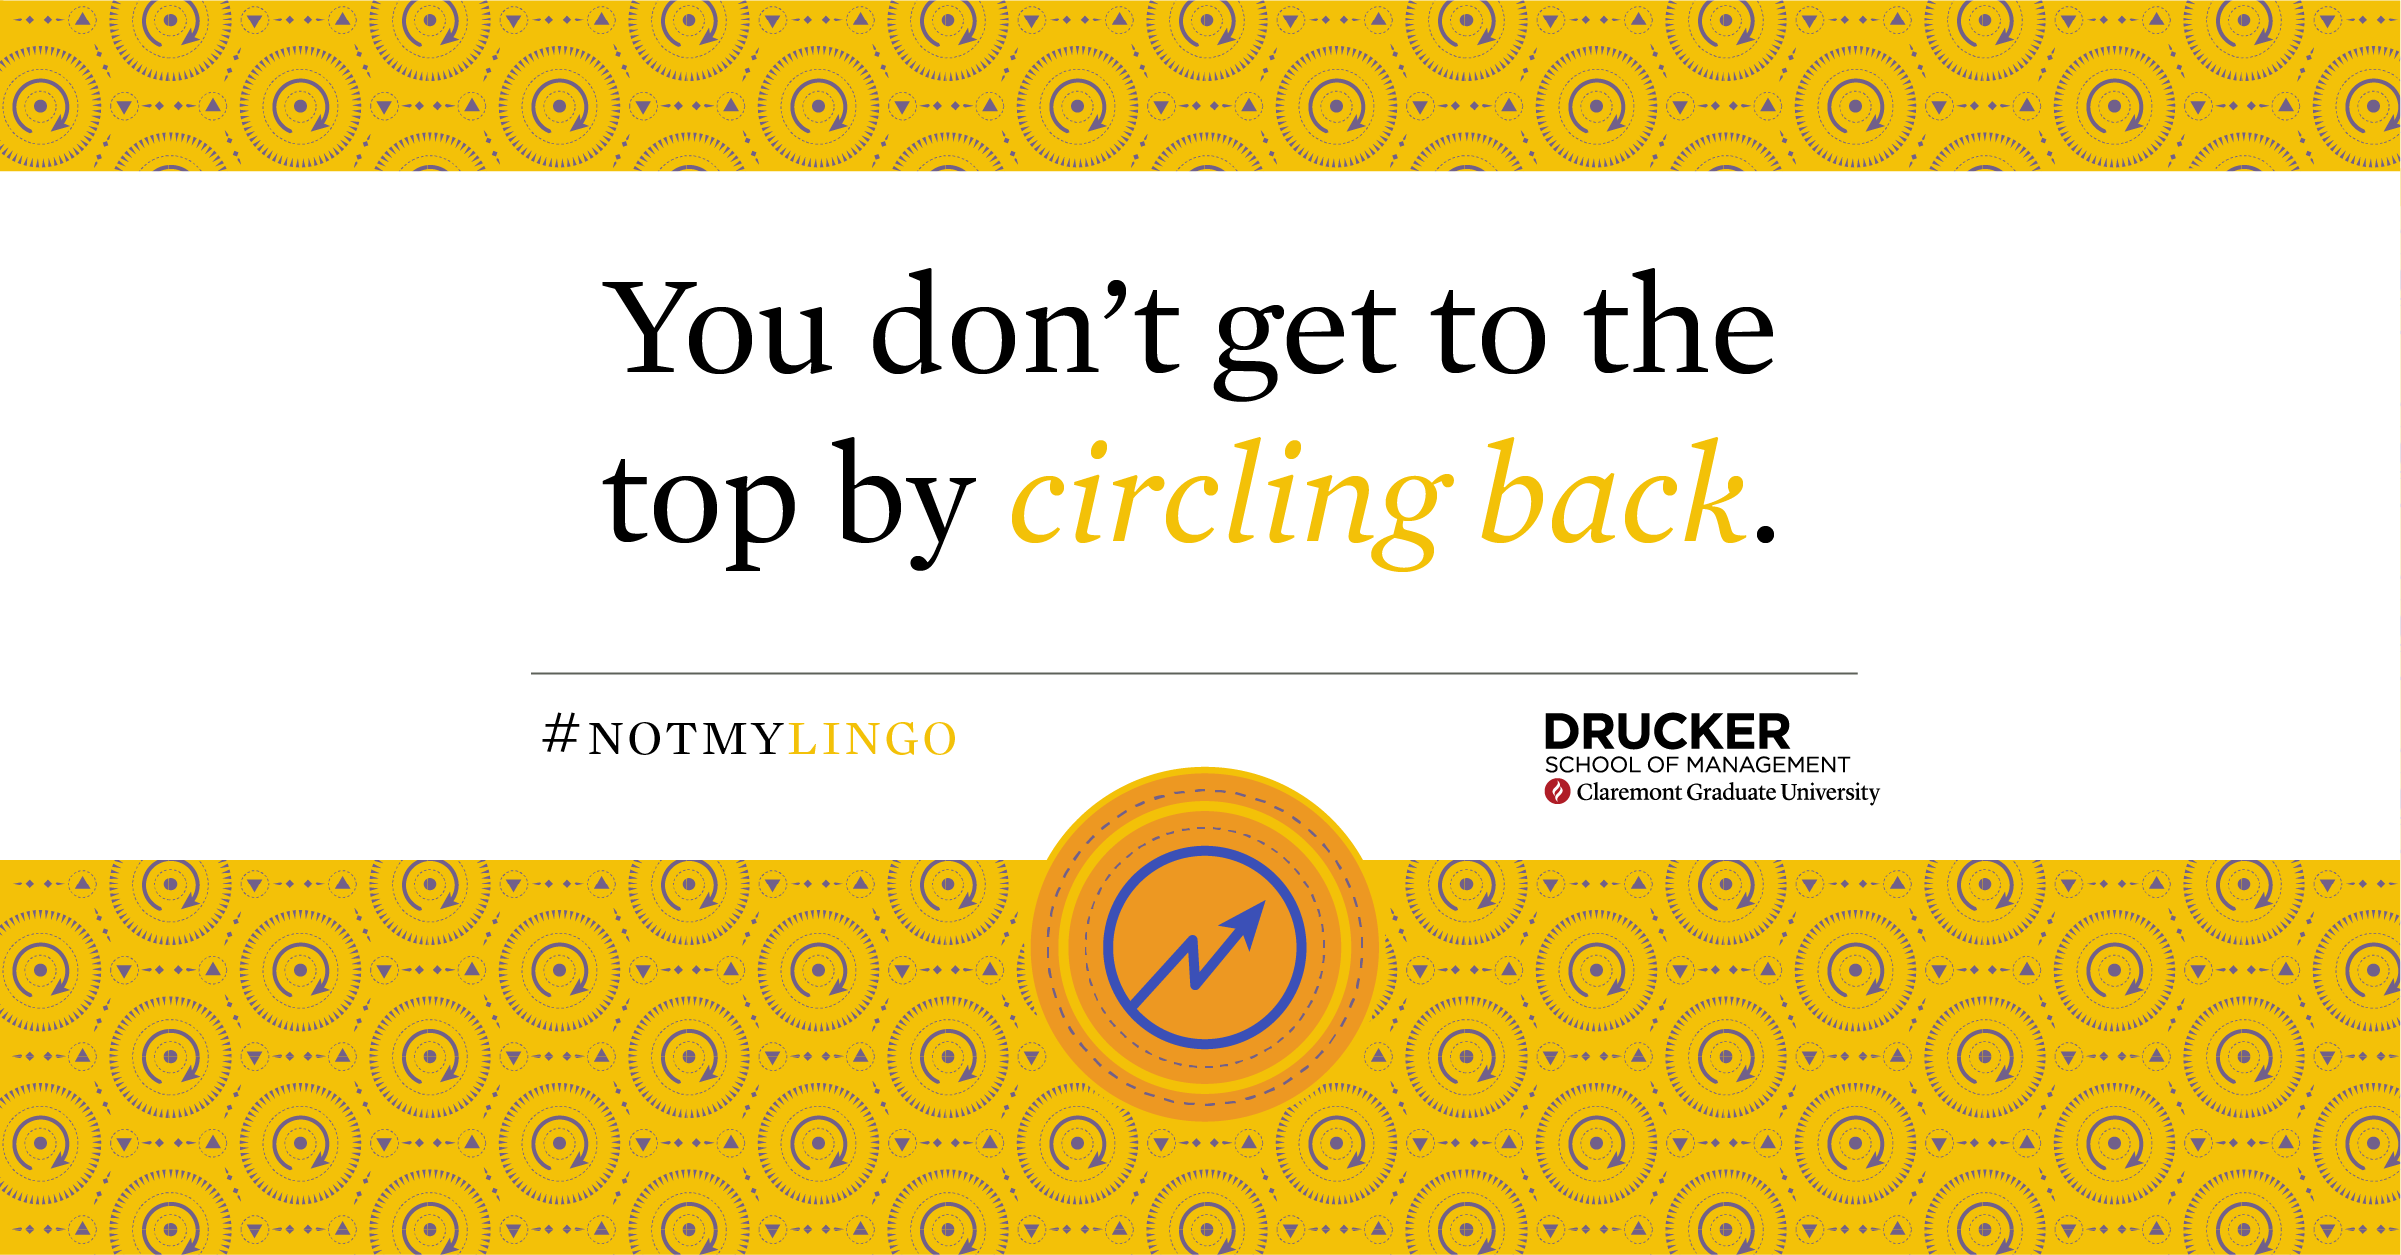 Drucker School of Management Circling Back Graphic designed by Kilter